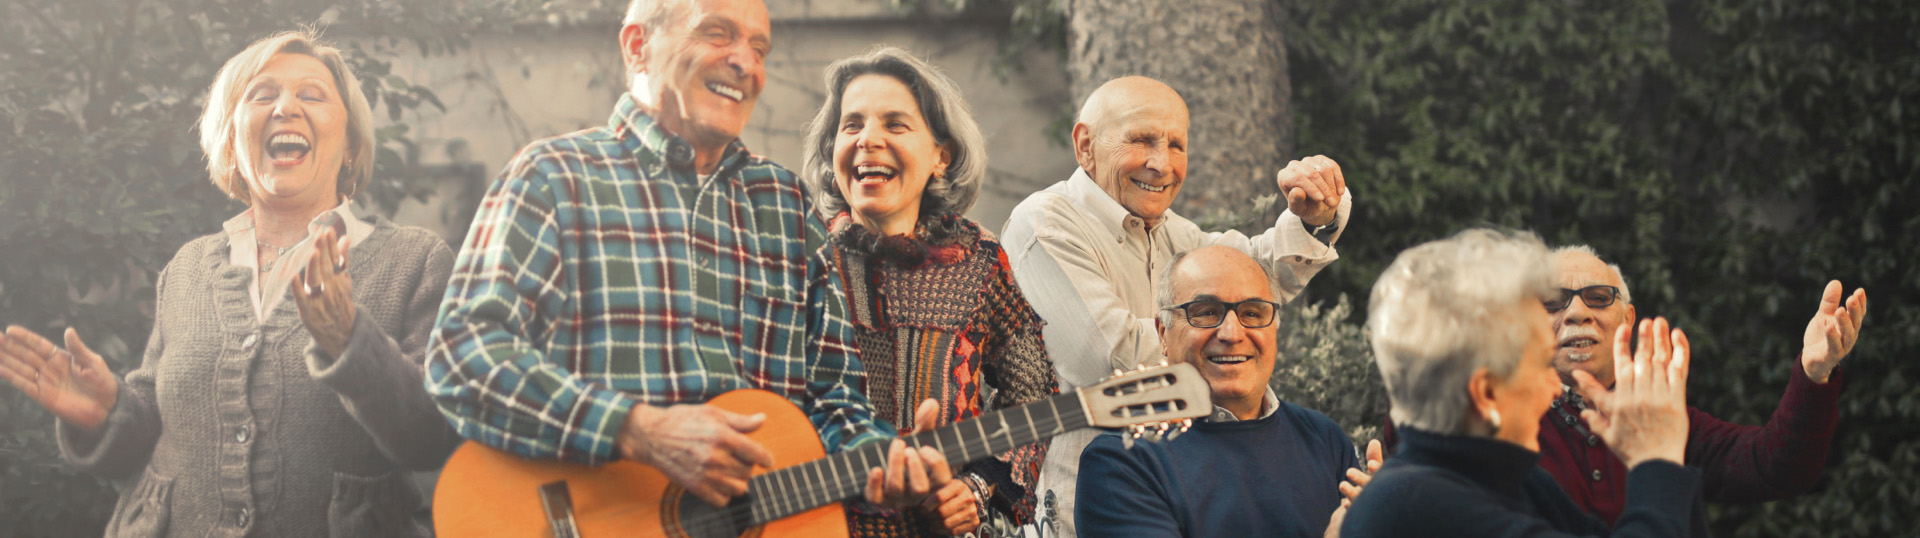 group of happy seniors listening to music and playing the guitar